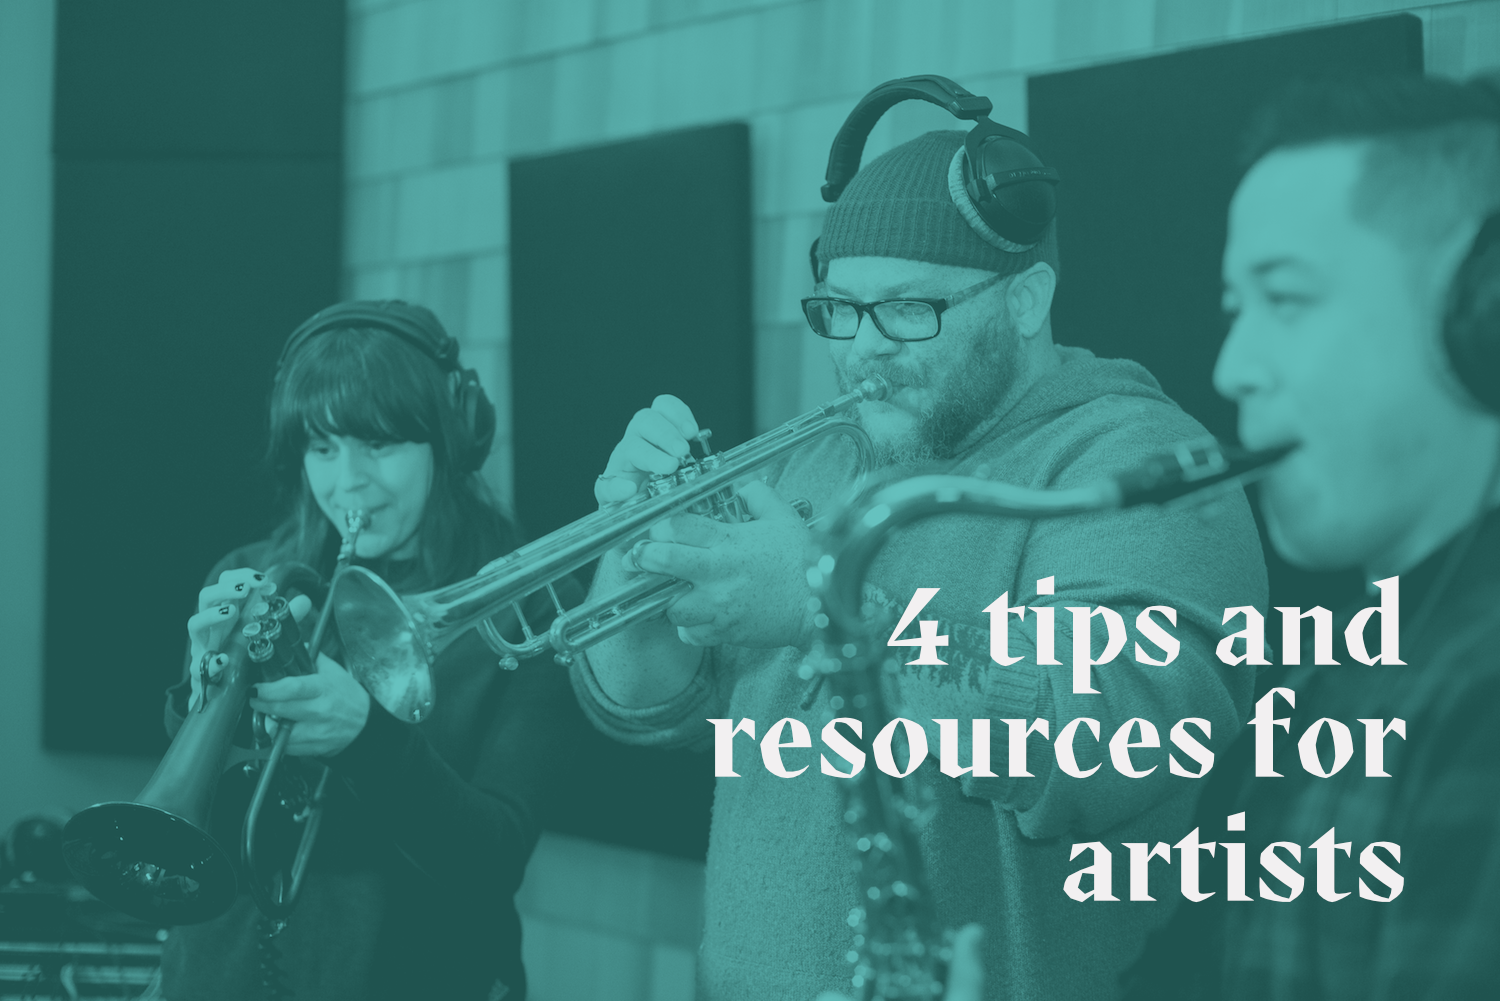 4 Ways Artists Can Get Their Music Out There (While Staying Inside)